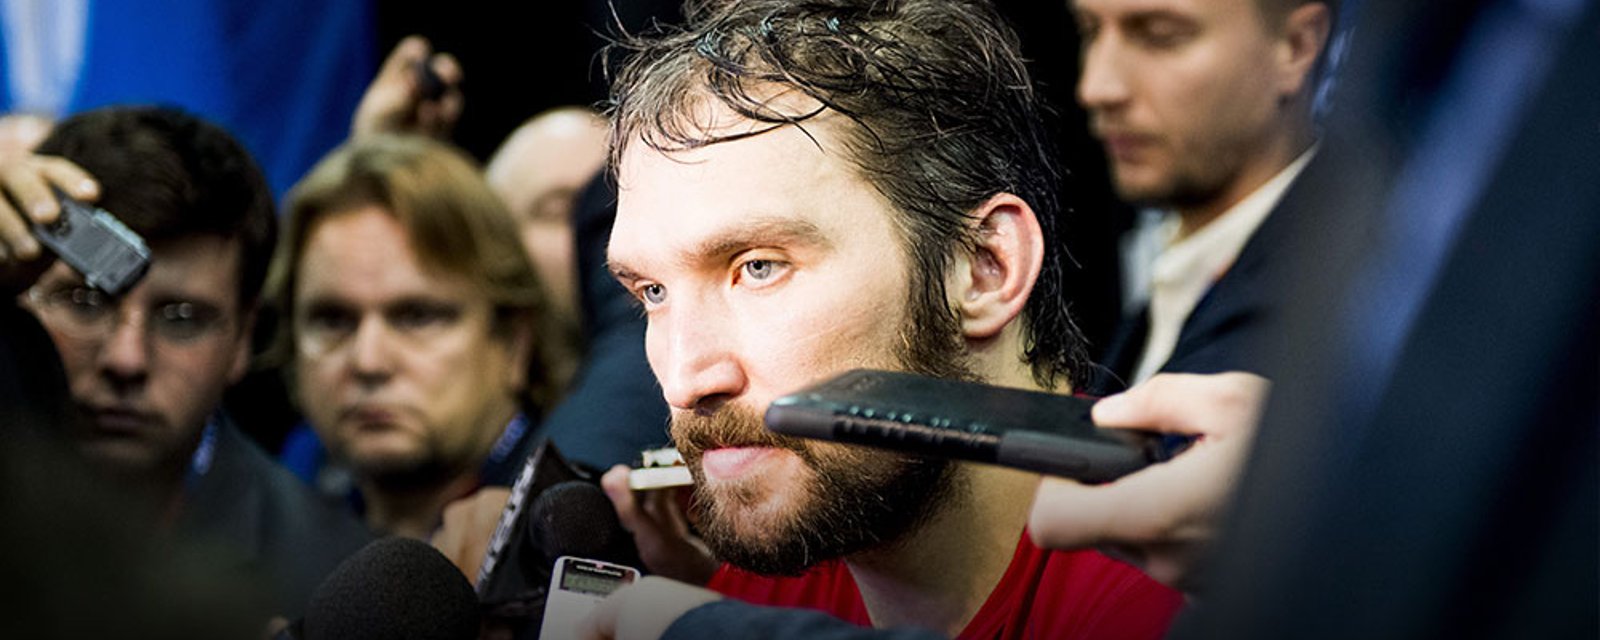 Has Ovechkin uncovered an Olympic loophole?